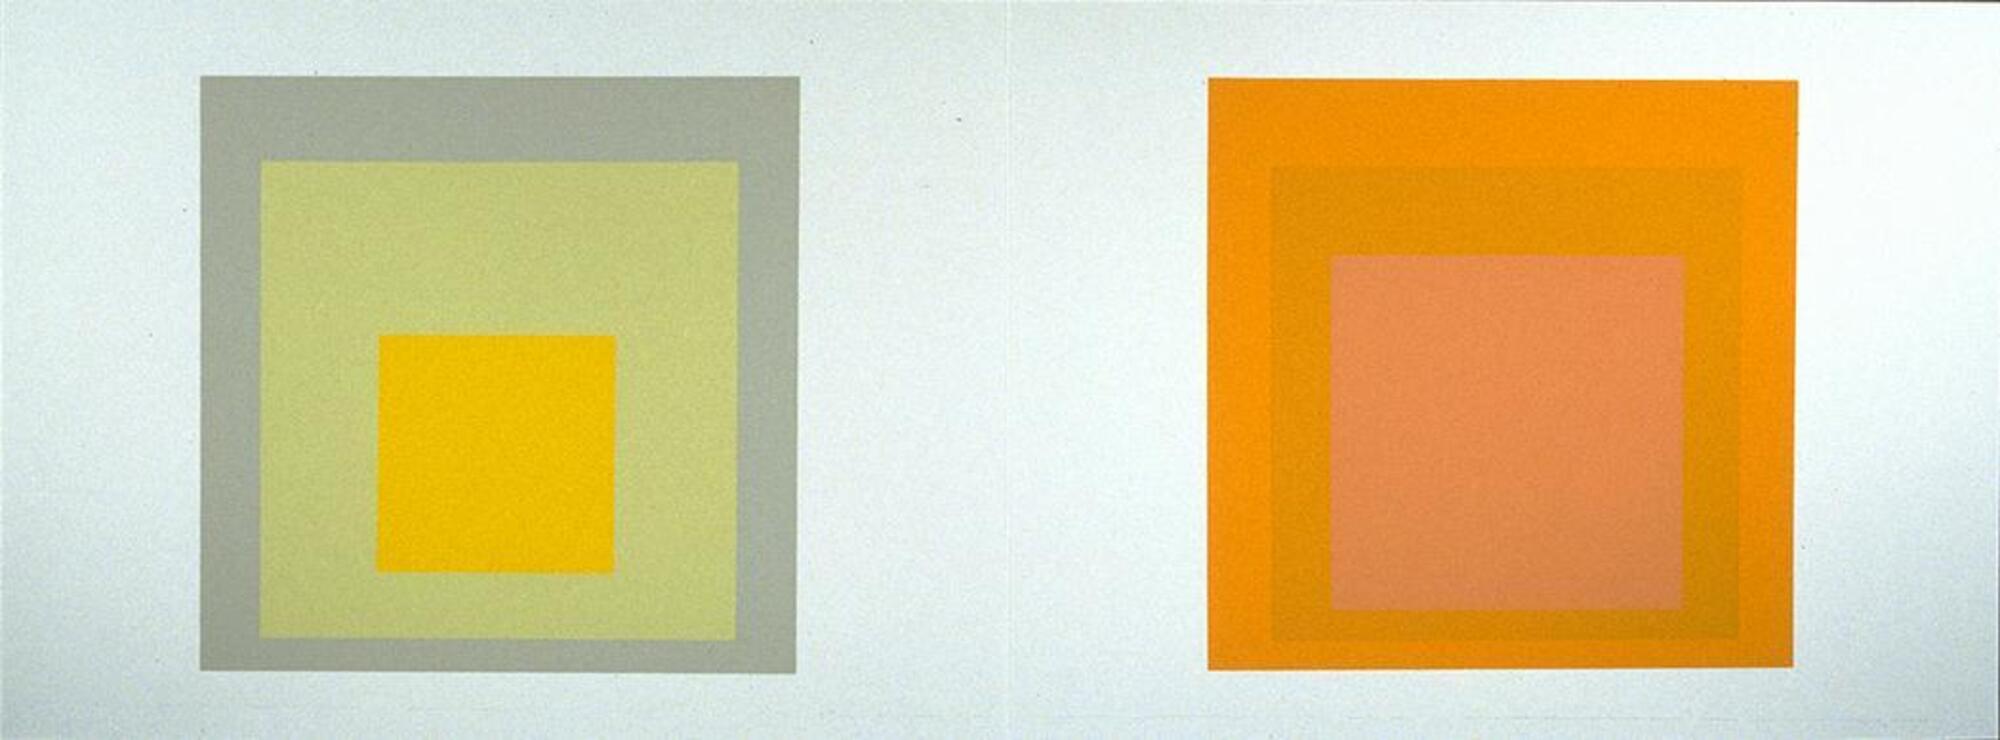 This print shows two rectangles, on the left, a grey square has pale green and yellow squares nested in it. On the right, an orange square has darker orange squares nested in it.